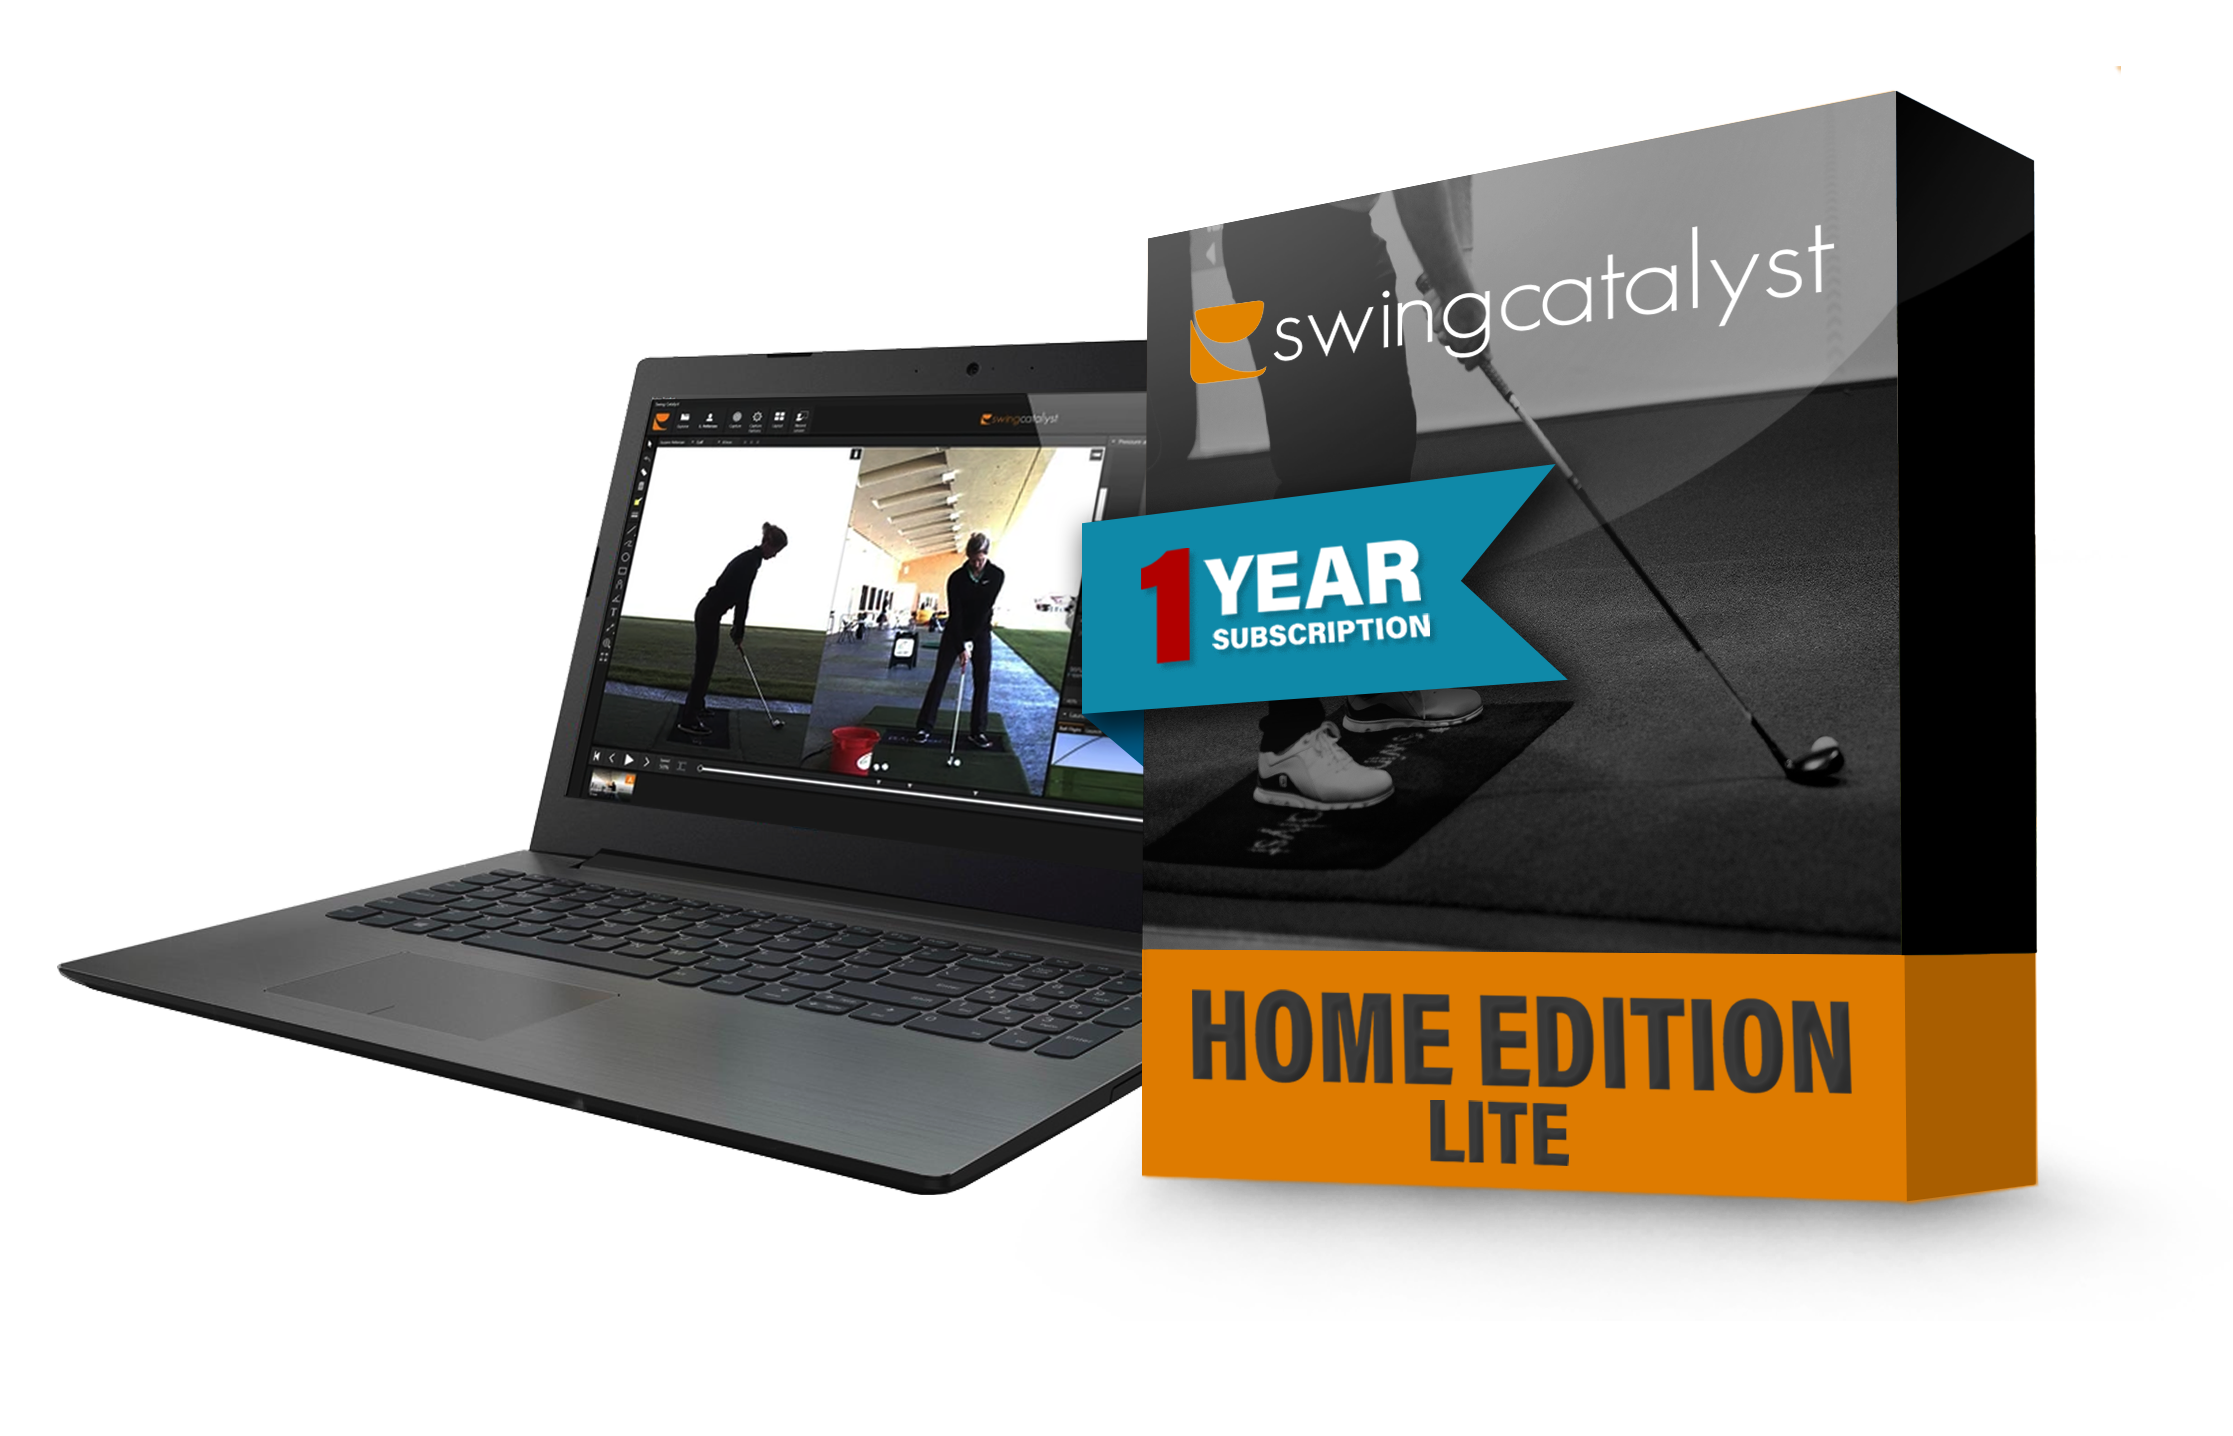 Swing Catalyst Home Edition LITE - one camera support